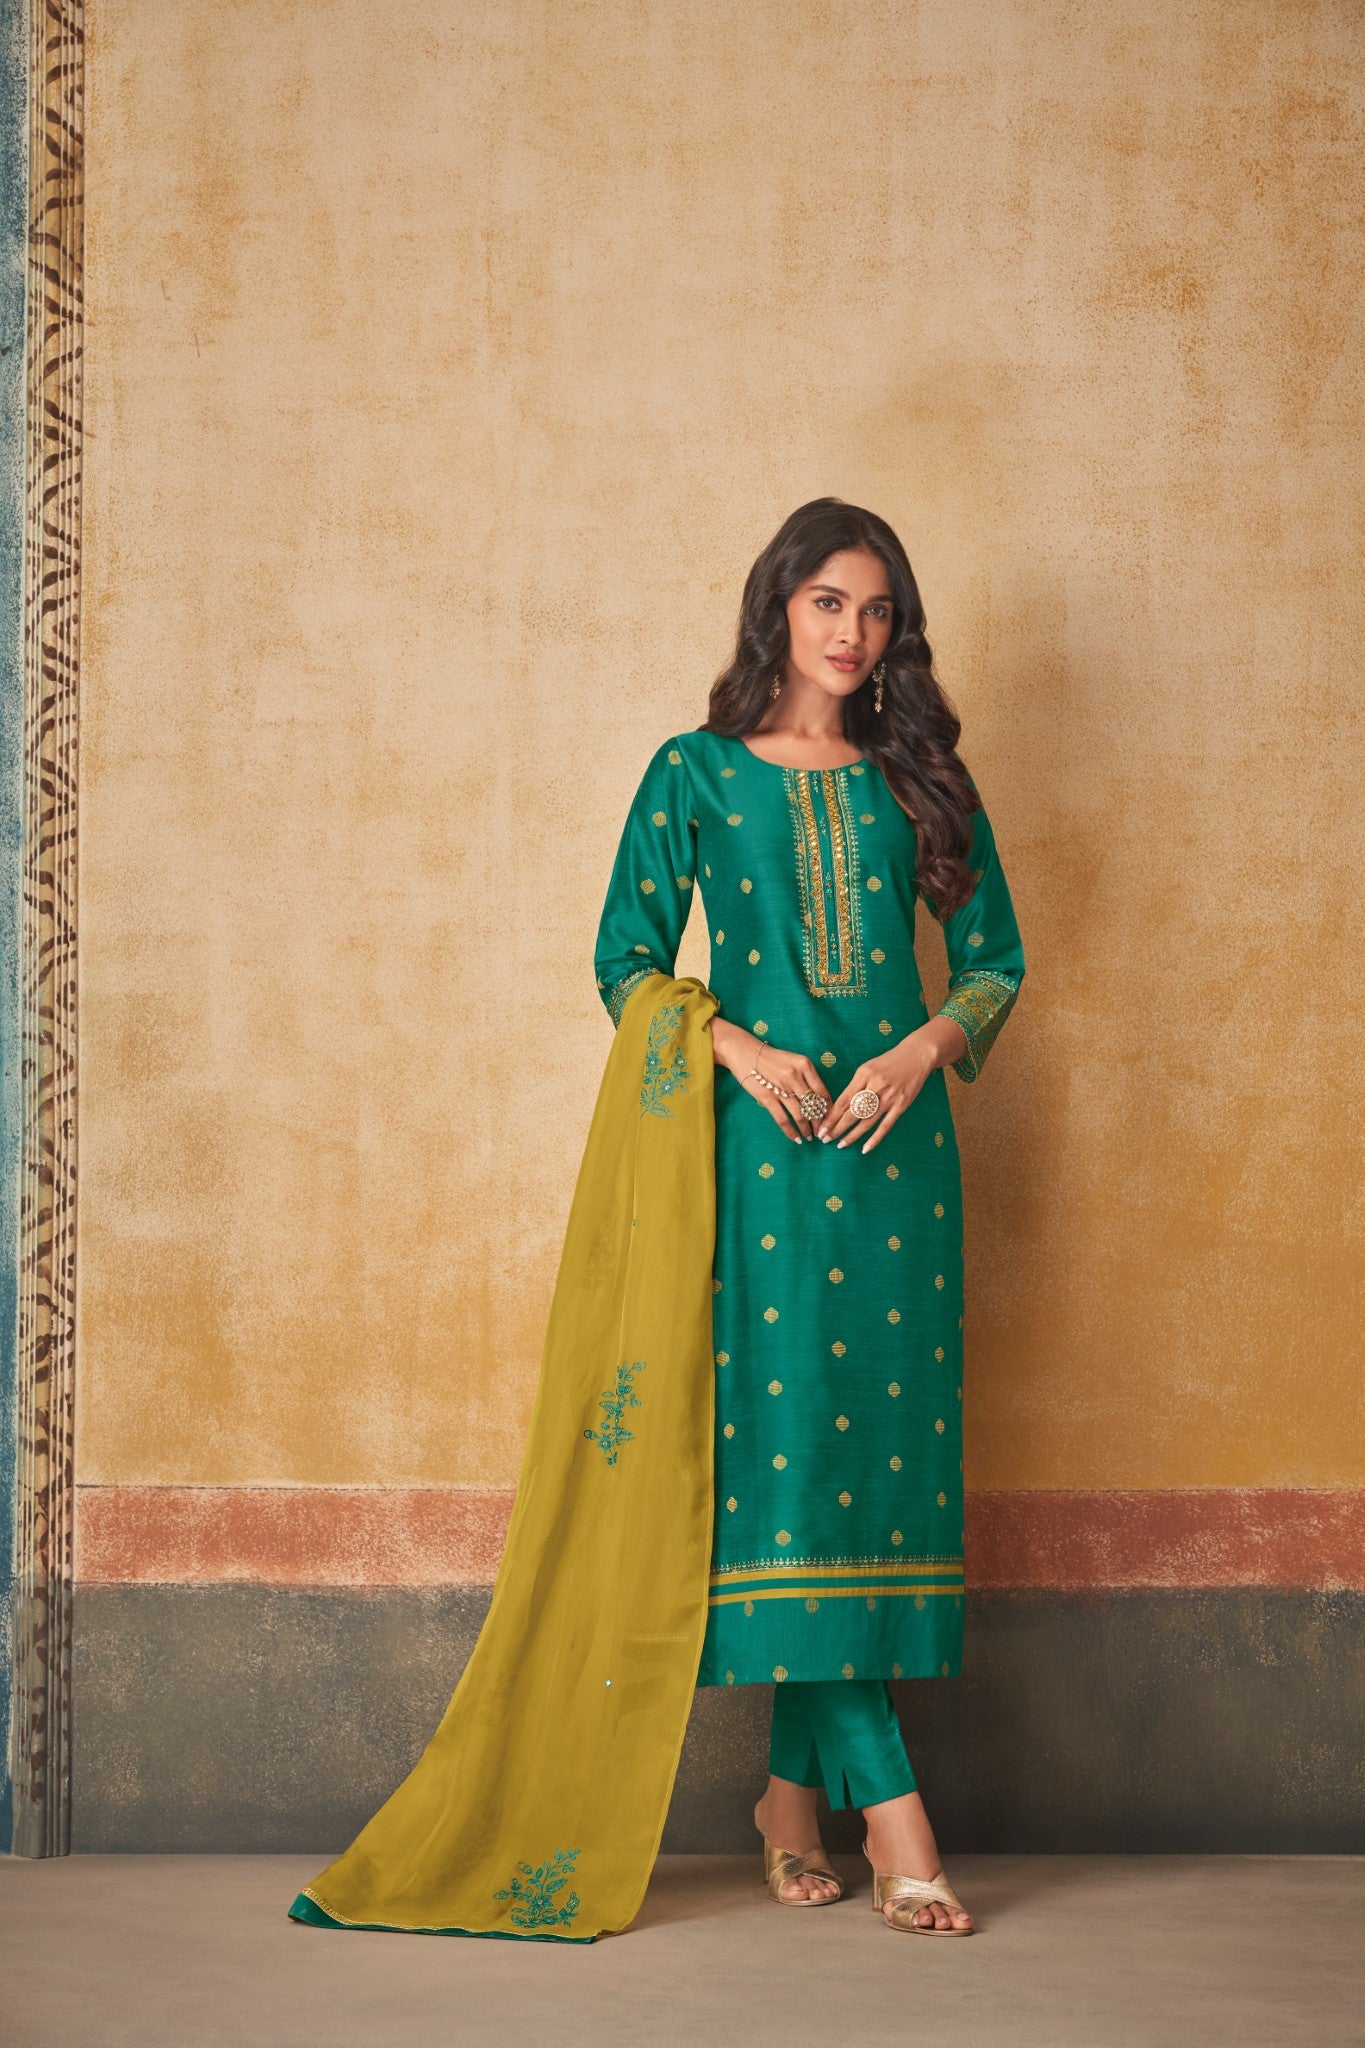 GREEN AND YELLOW SALWAR SUIT SET WITH SCATTERED BUTTIS